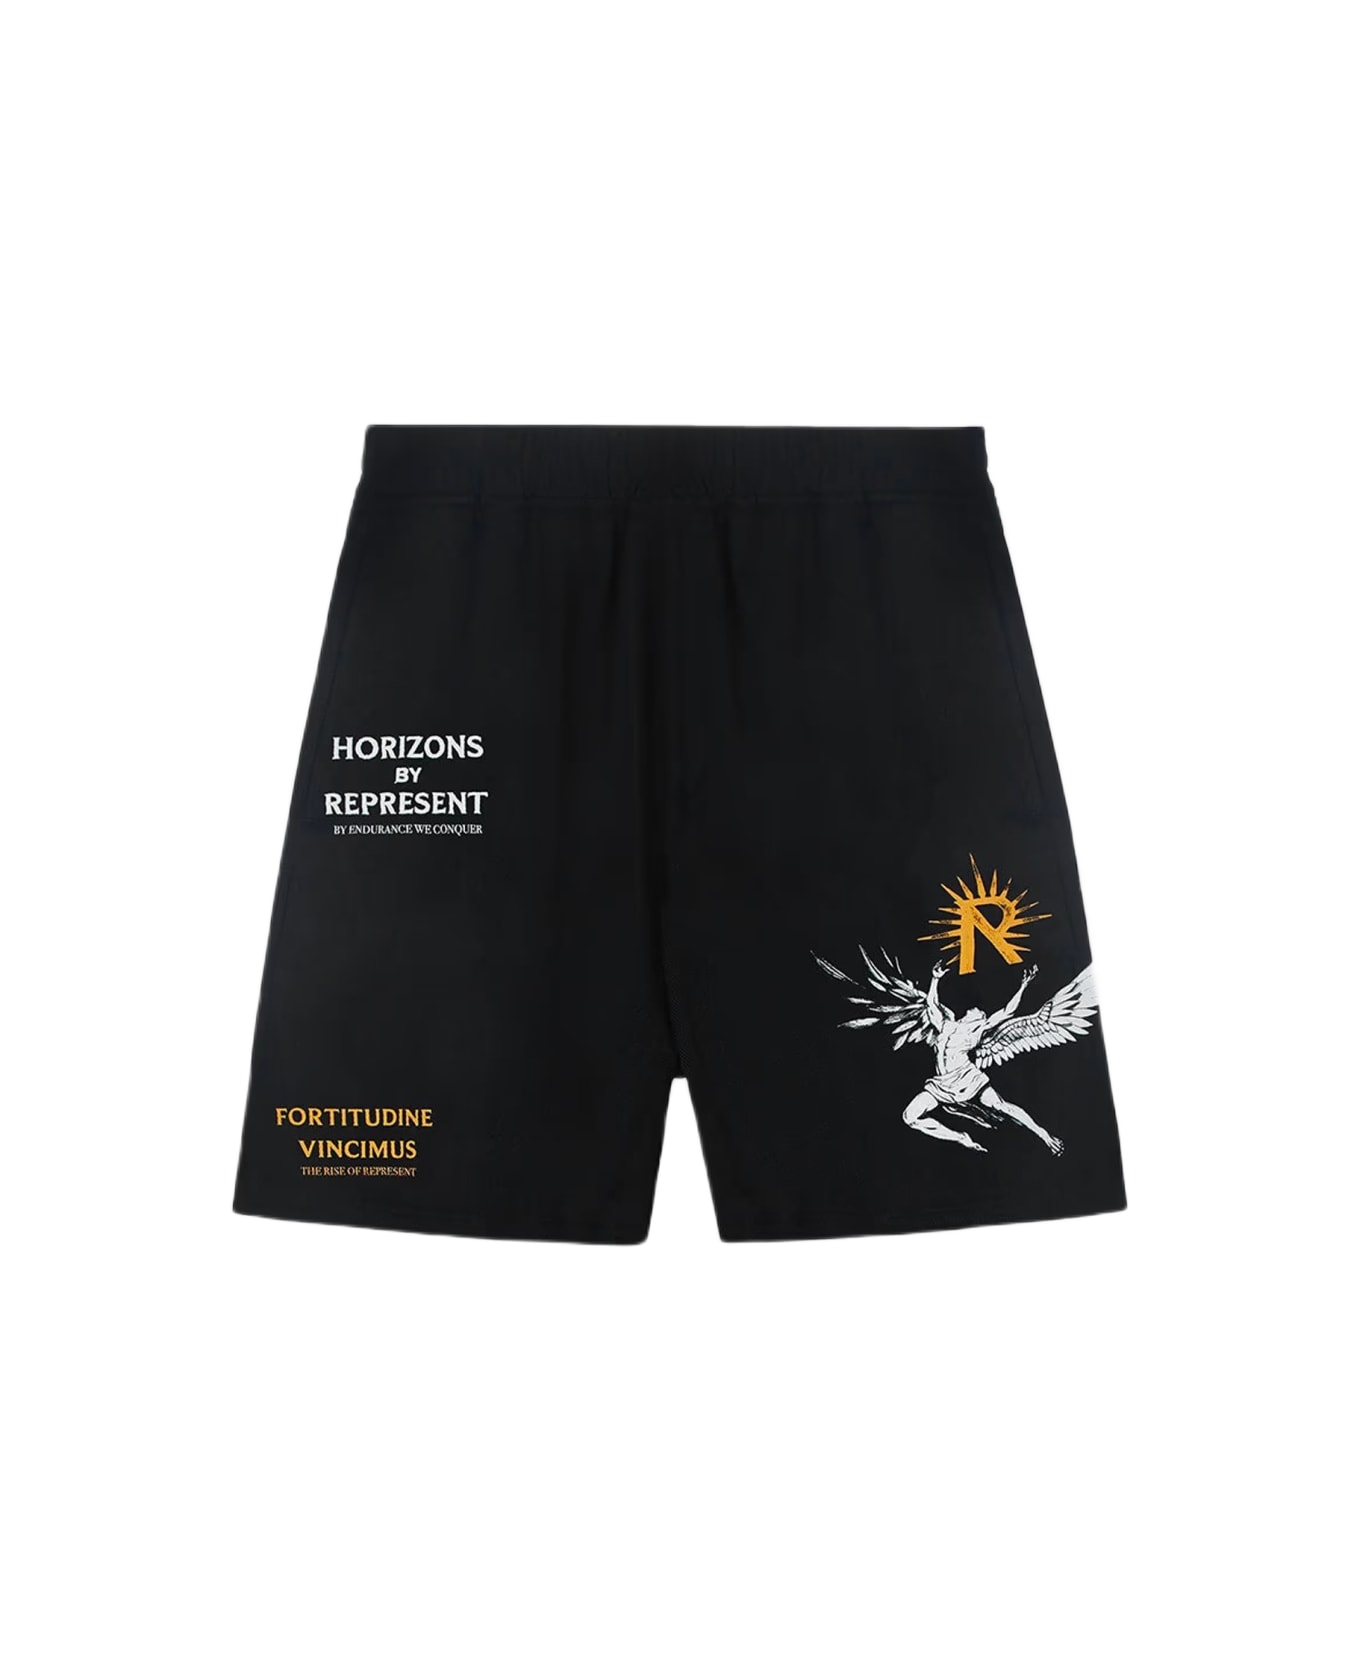 REPRESENT Icarus Short Black lyocell shorts with Icarus graphic print and logo - Icarus Short - Nero